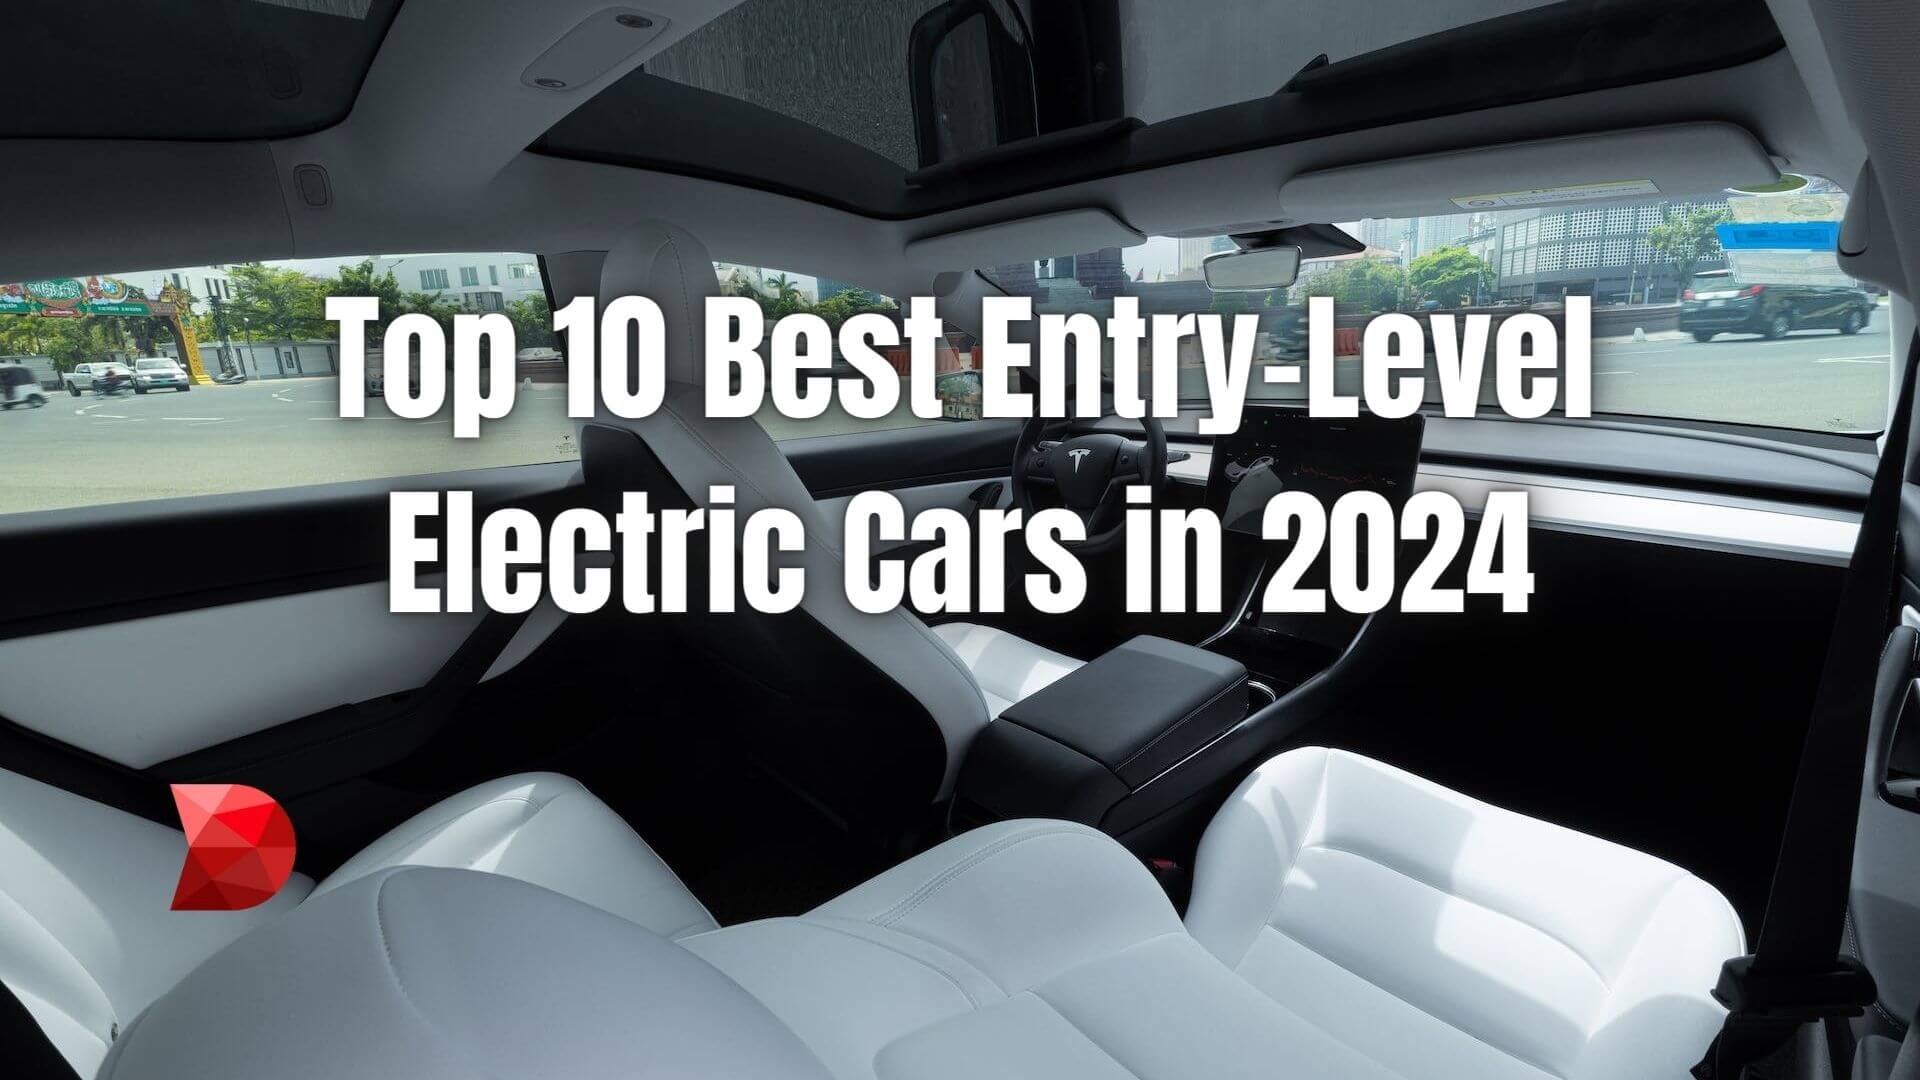 Navigate the EV landscape efficiently! Click here to explore our comprehensive guide to the top 10 best entry-level electric cars in 2024.